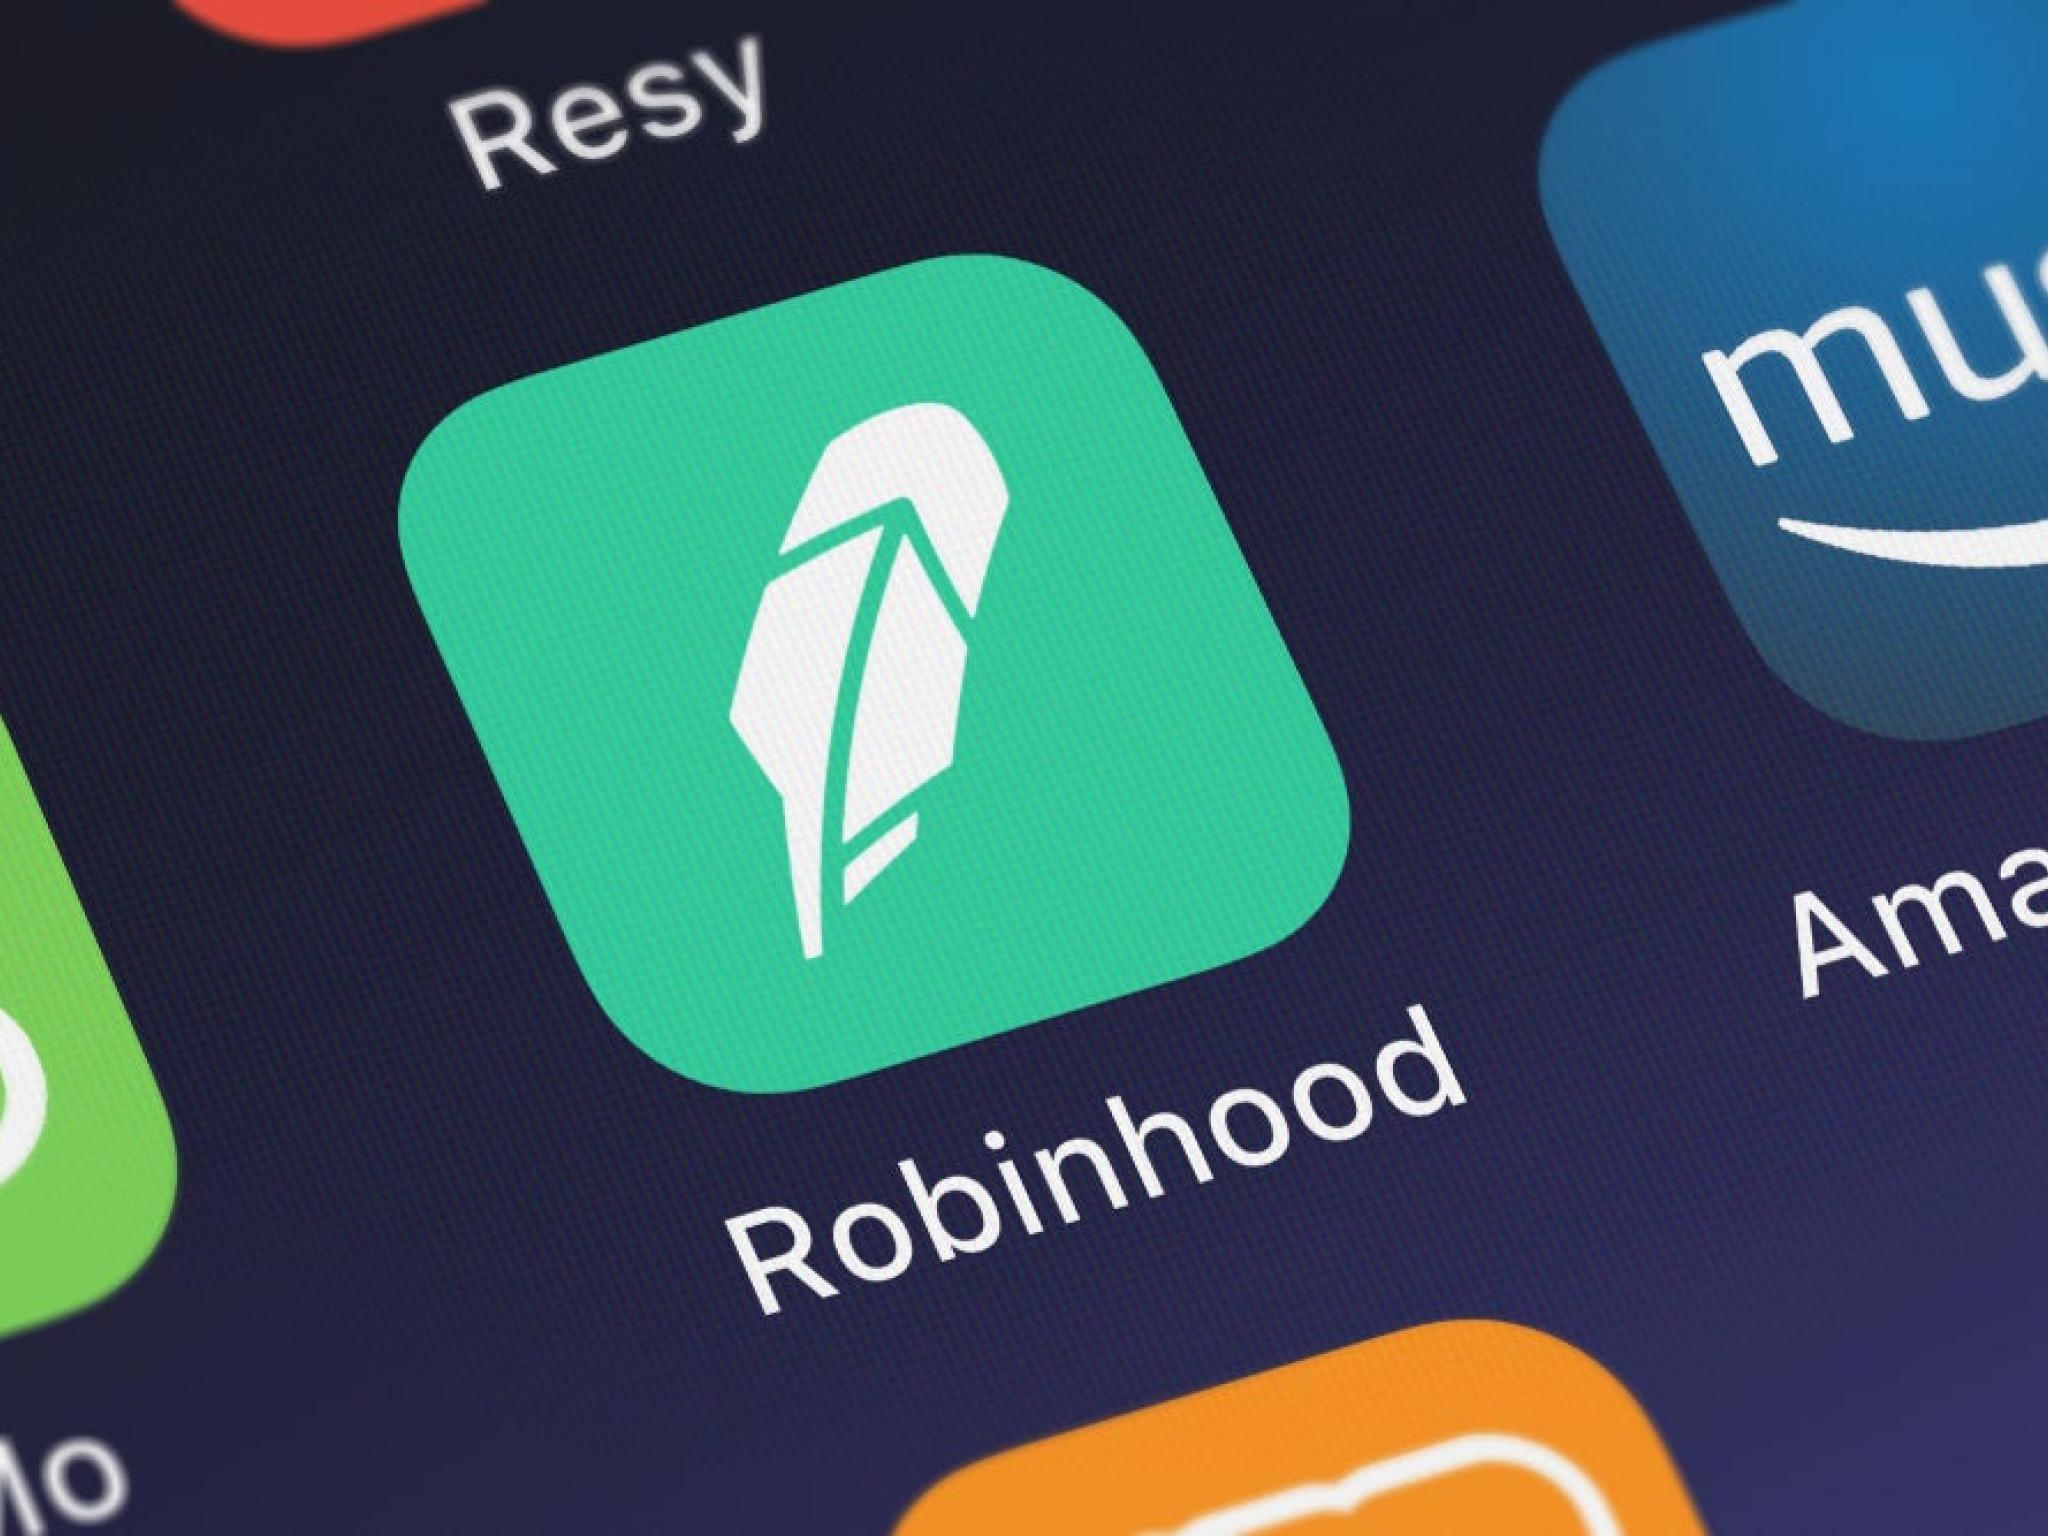  robinhood-reports-3x-jump-in-crypto-volume-executives-say-business-as-usual-despite-sec-wells-notice 